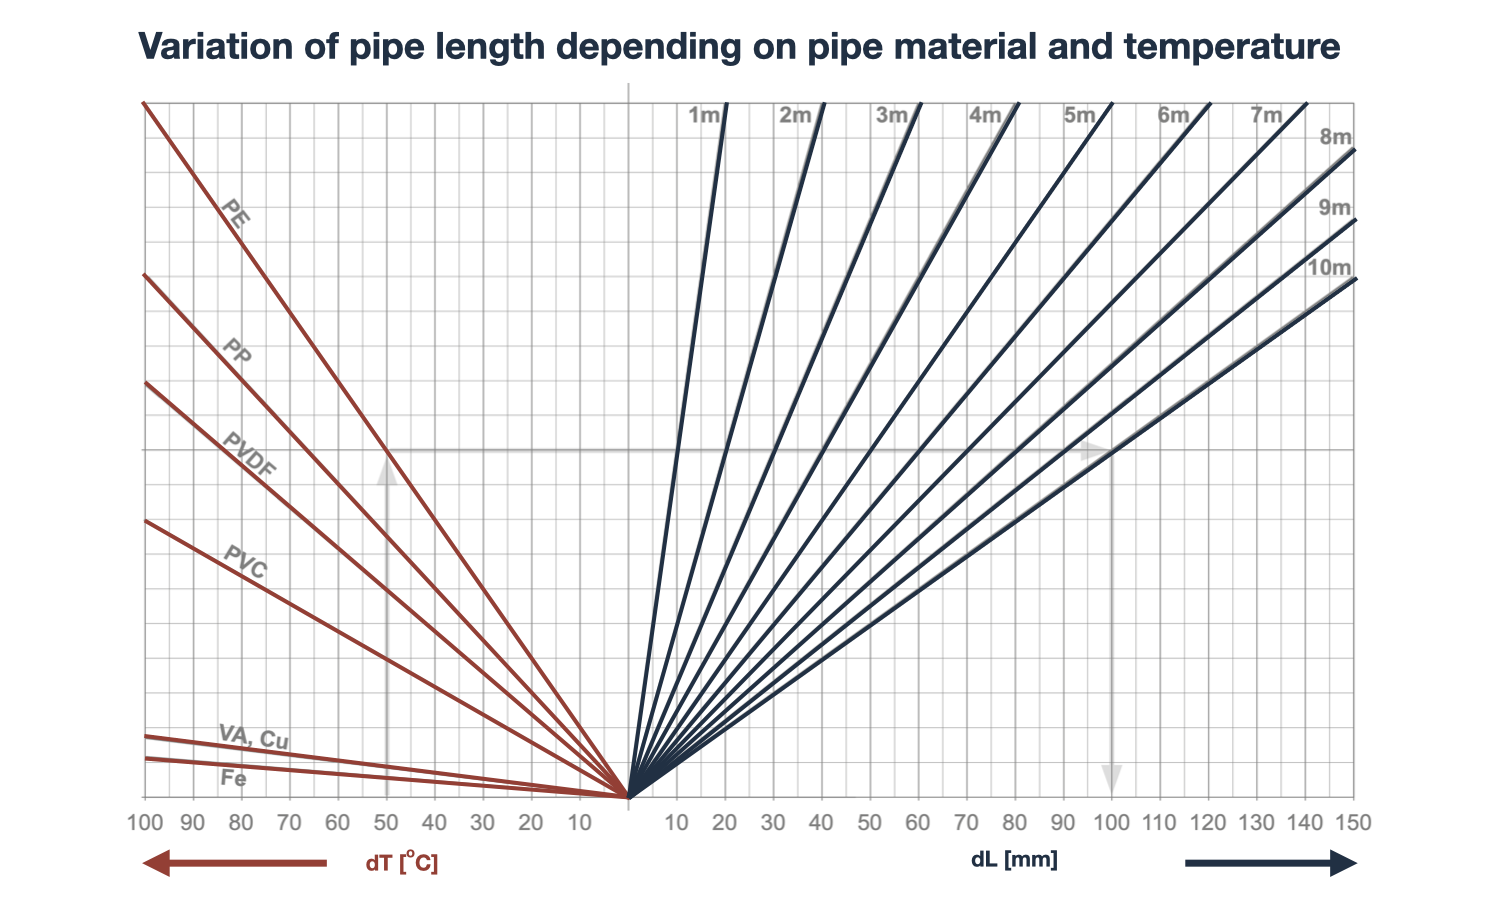 Calculation of variations in pipe length